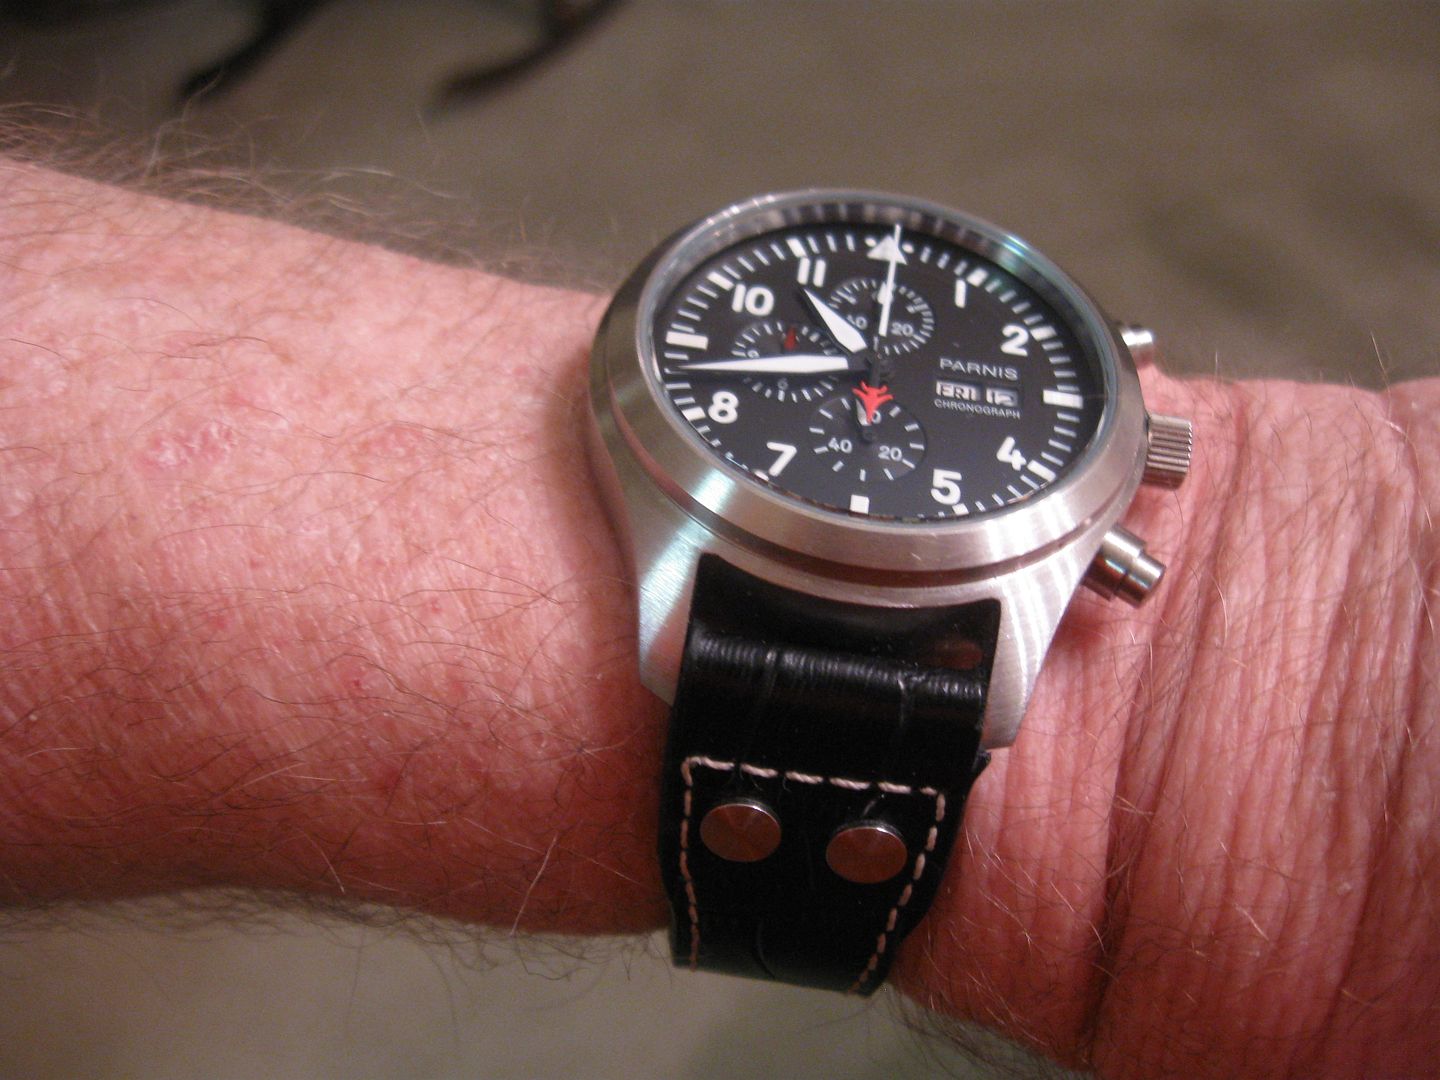 PARNIS.IWC.%20Chrono.homage.blk.leather%